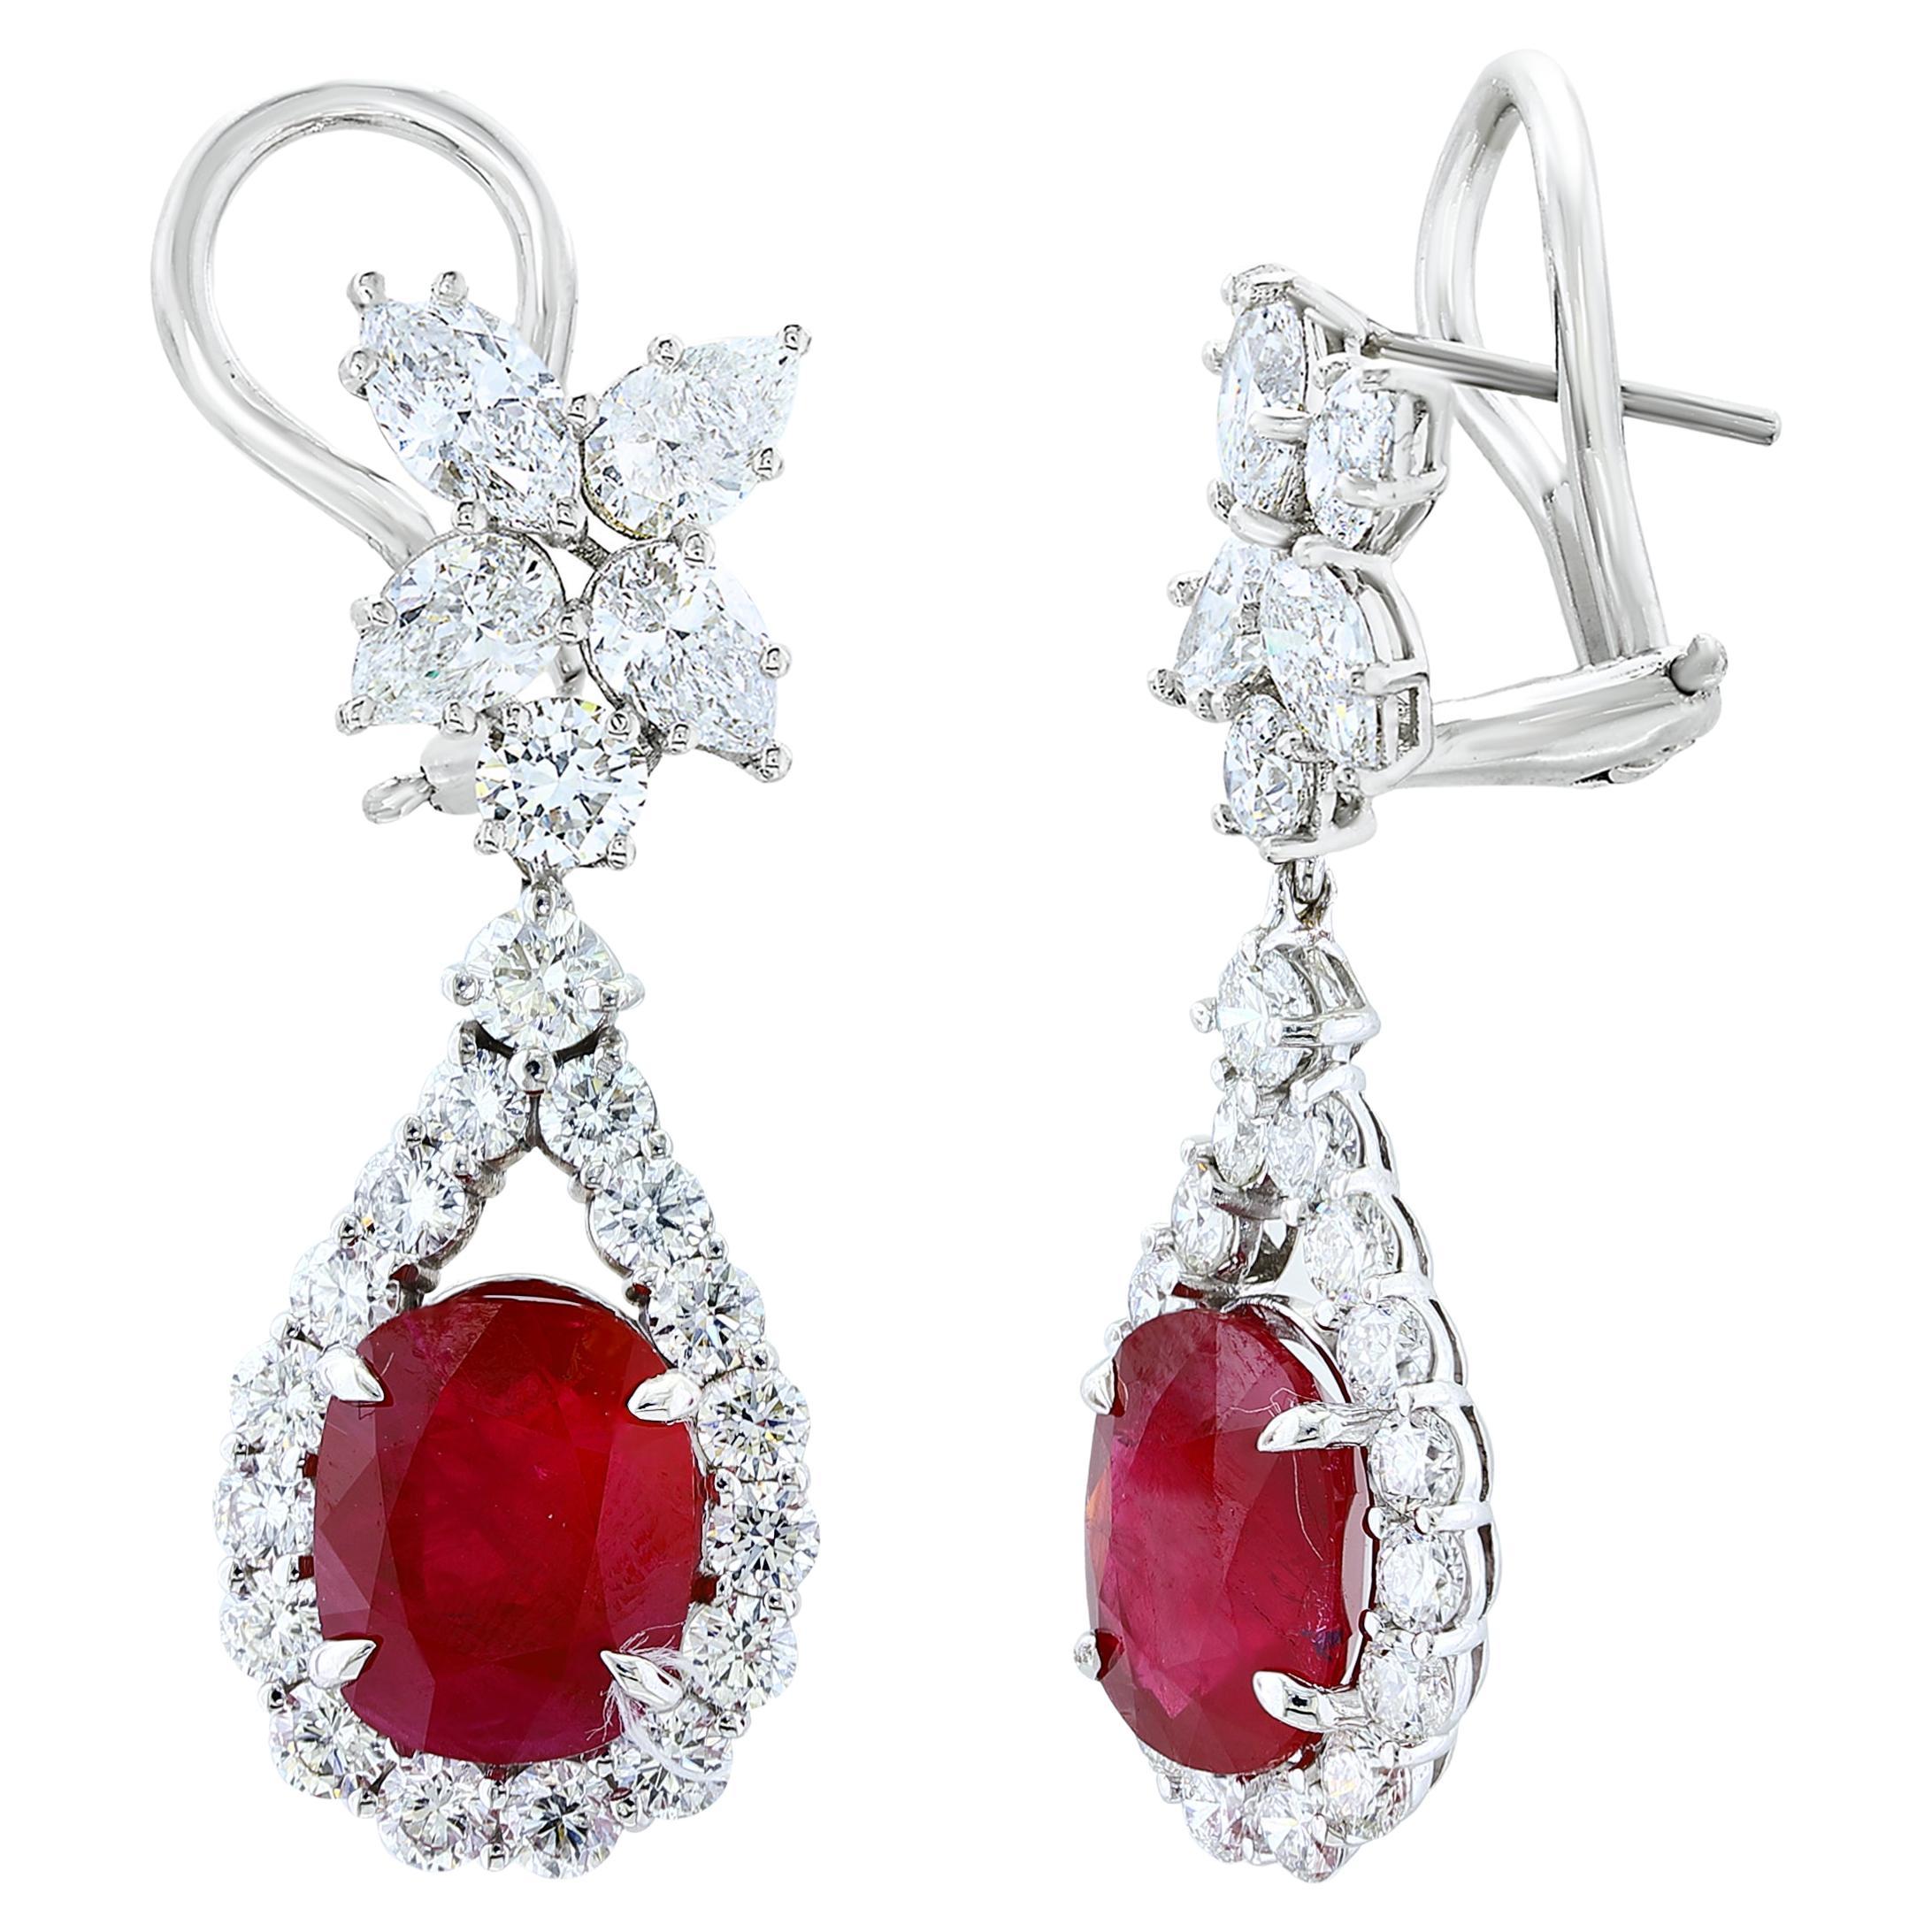 6.81 Carat Ruby and Diamond Drop Earrings in 18K White Gold